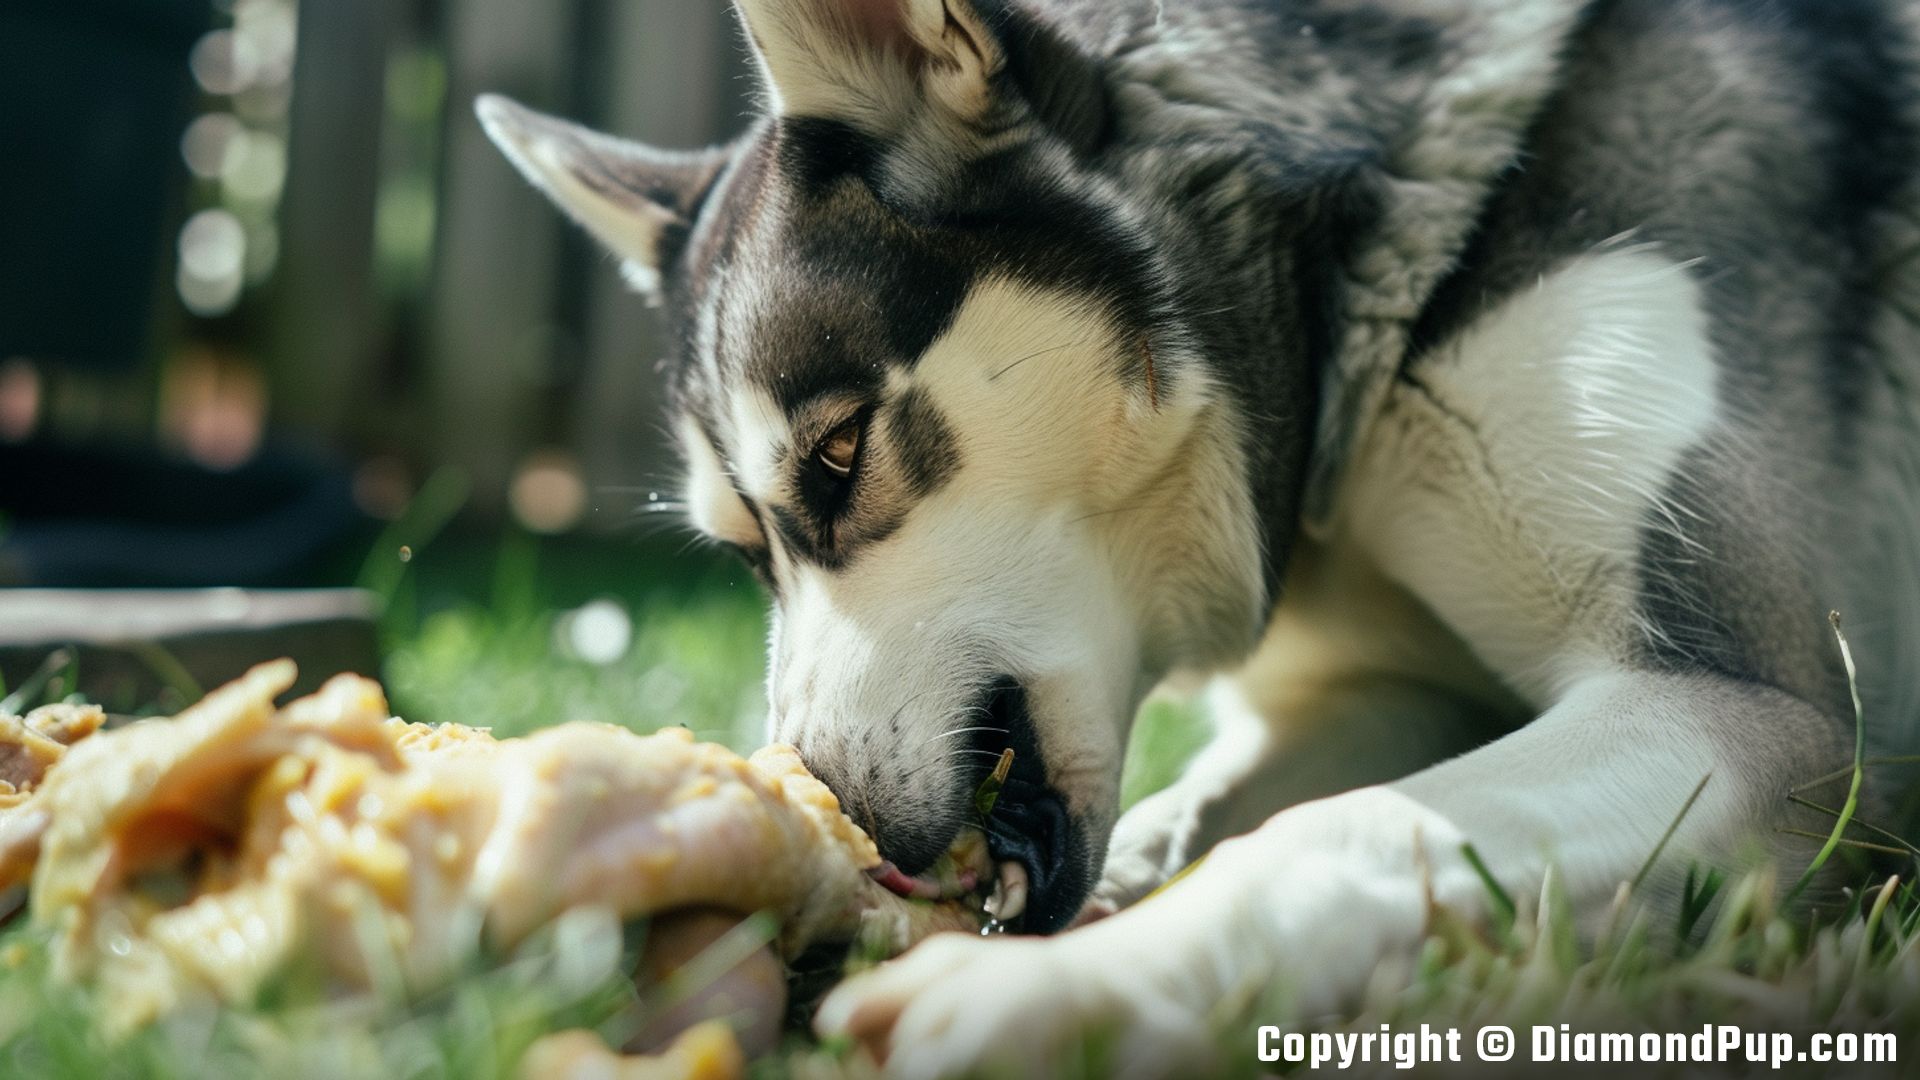 Photograph of a Playful Husky Eating Chicken